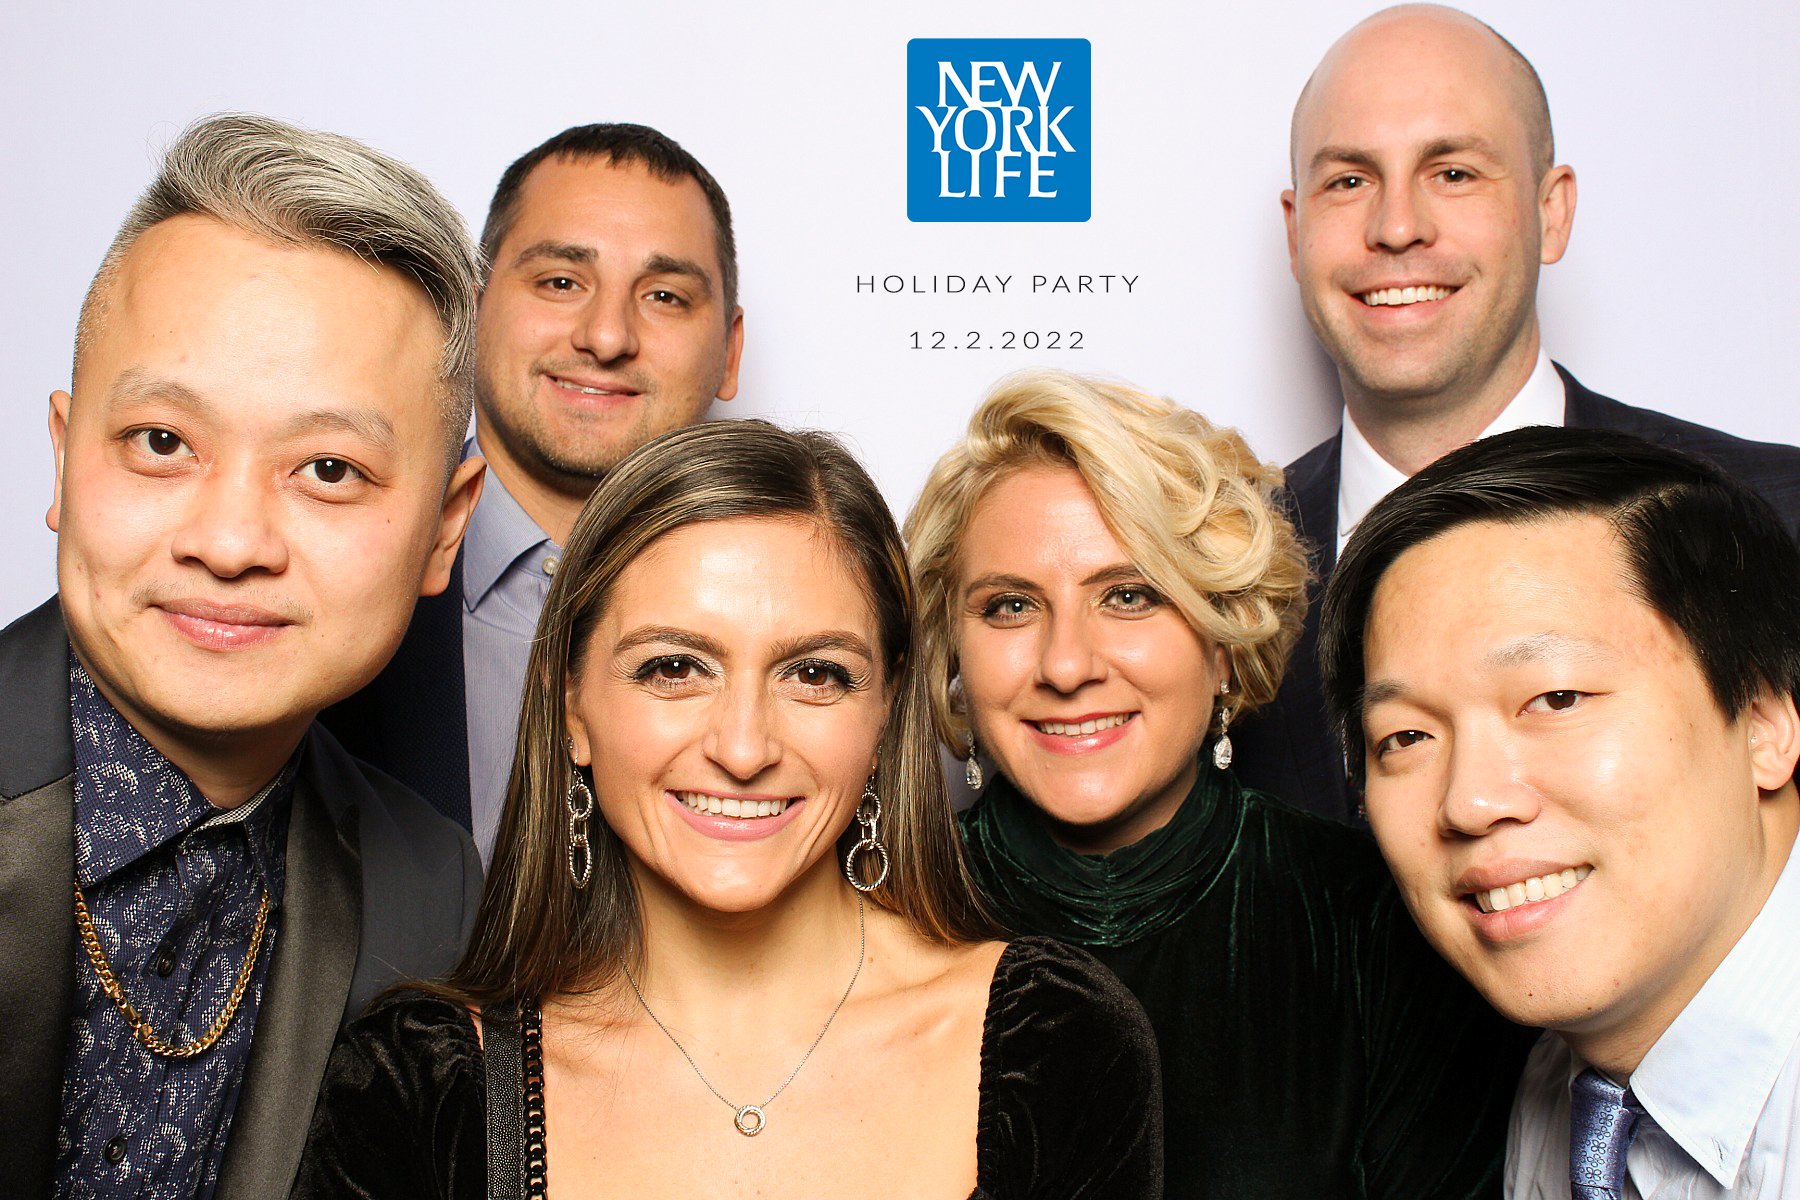 NYC Team Photo Booth Rental Holiday Party Gala_03.jpg